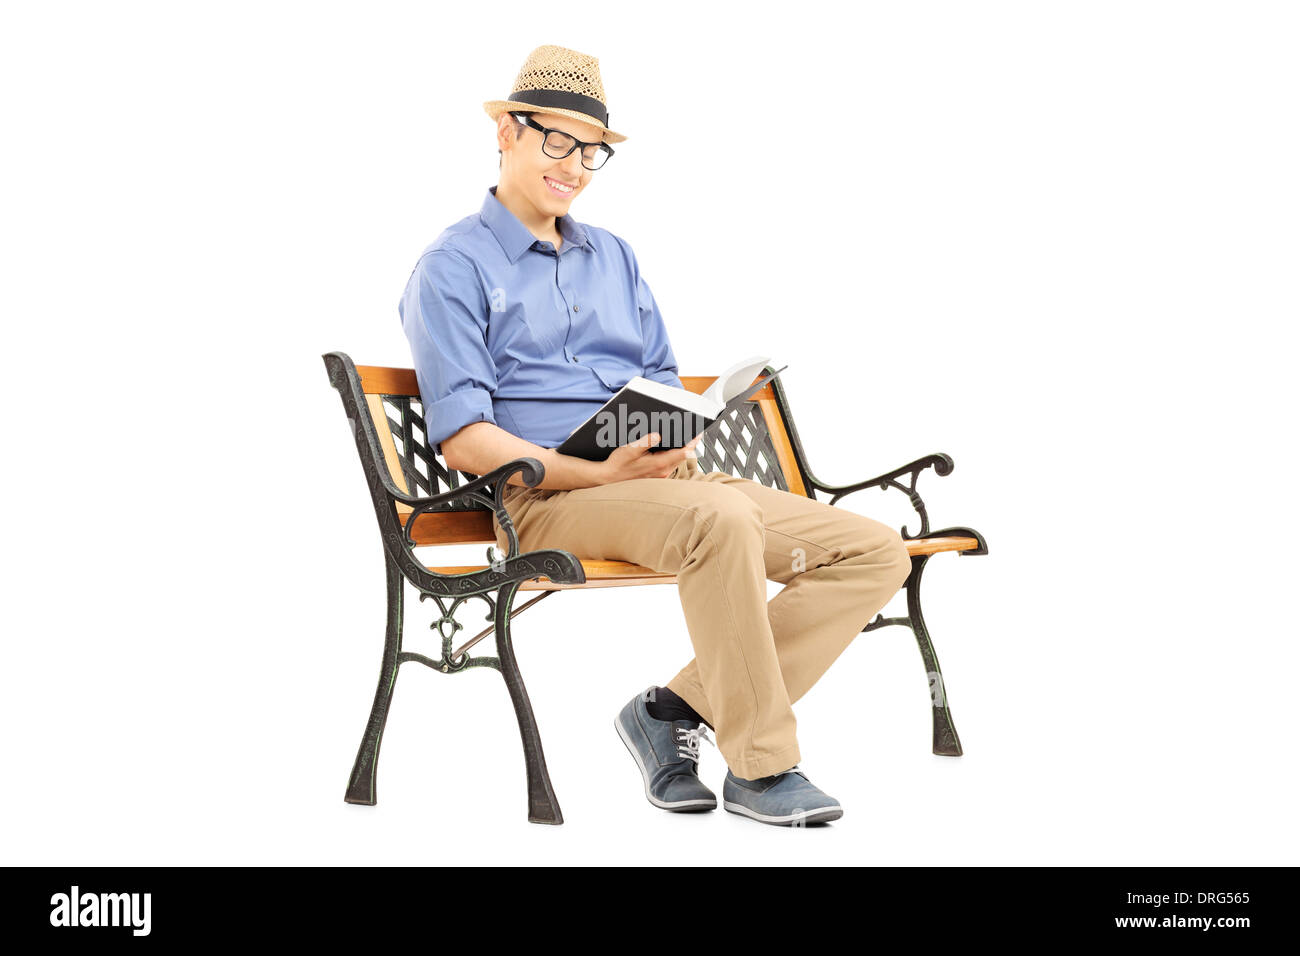 Young man with glasses reading a book on wooden bench Stock Photo